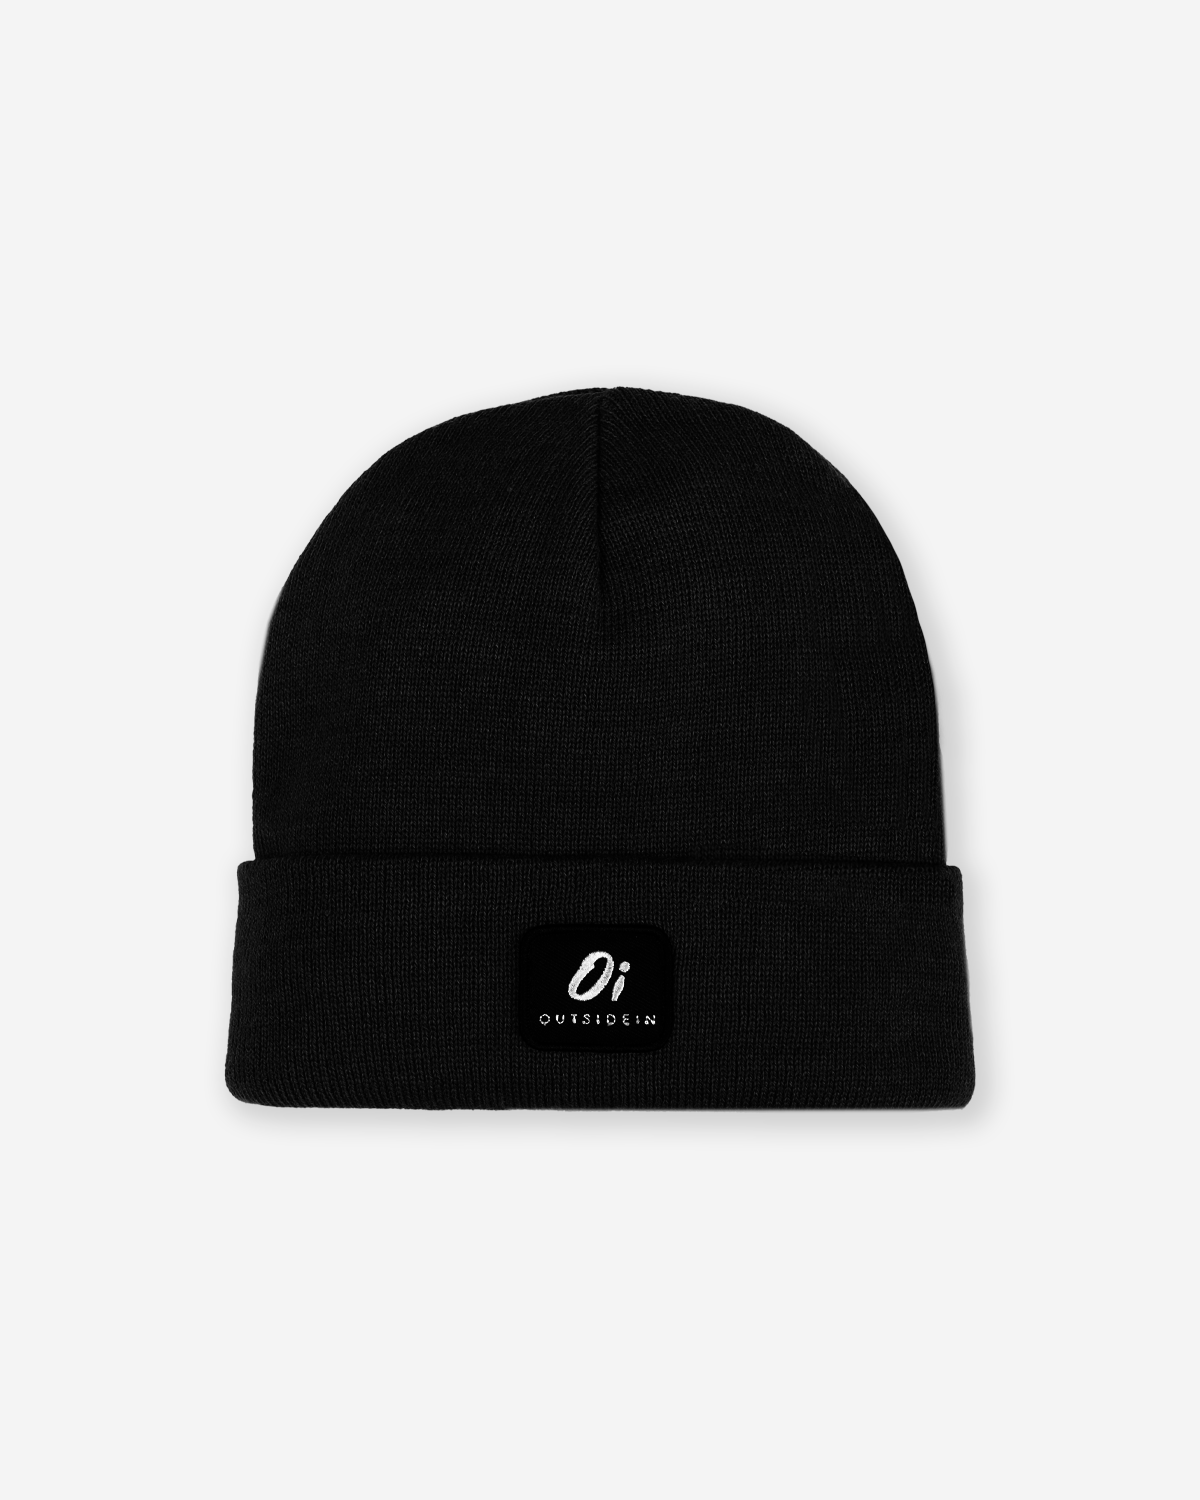 Outside In Unisex Thermal Beanie - Black - The Foot Factory